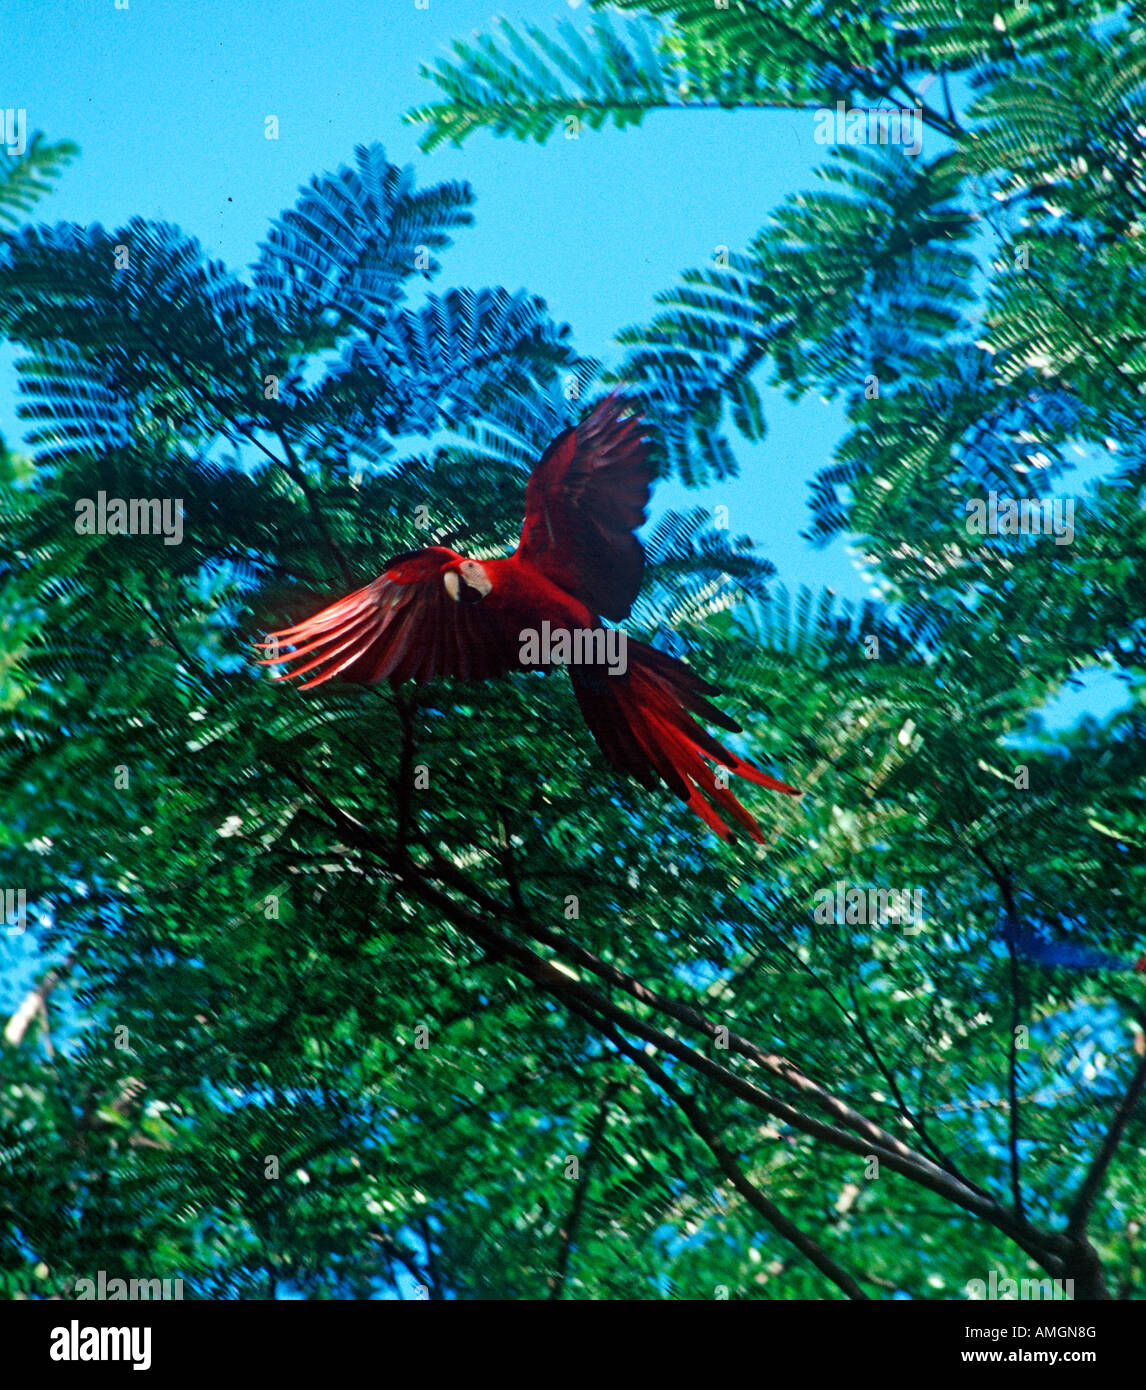 Scarlet Macaw (Ara macao), also known as Guacamaya or Lapa Roja, in the rainforest near Montes Azules Biosphere Reserve. Stock Photo